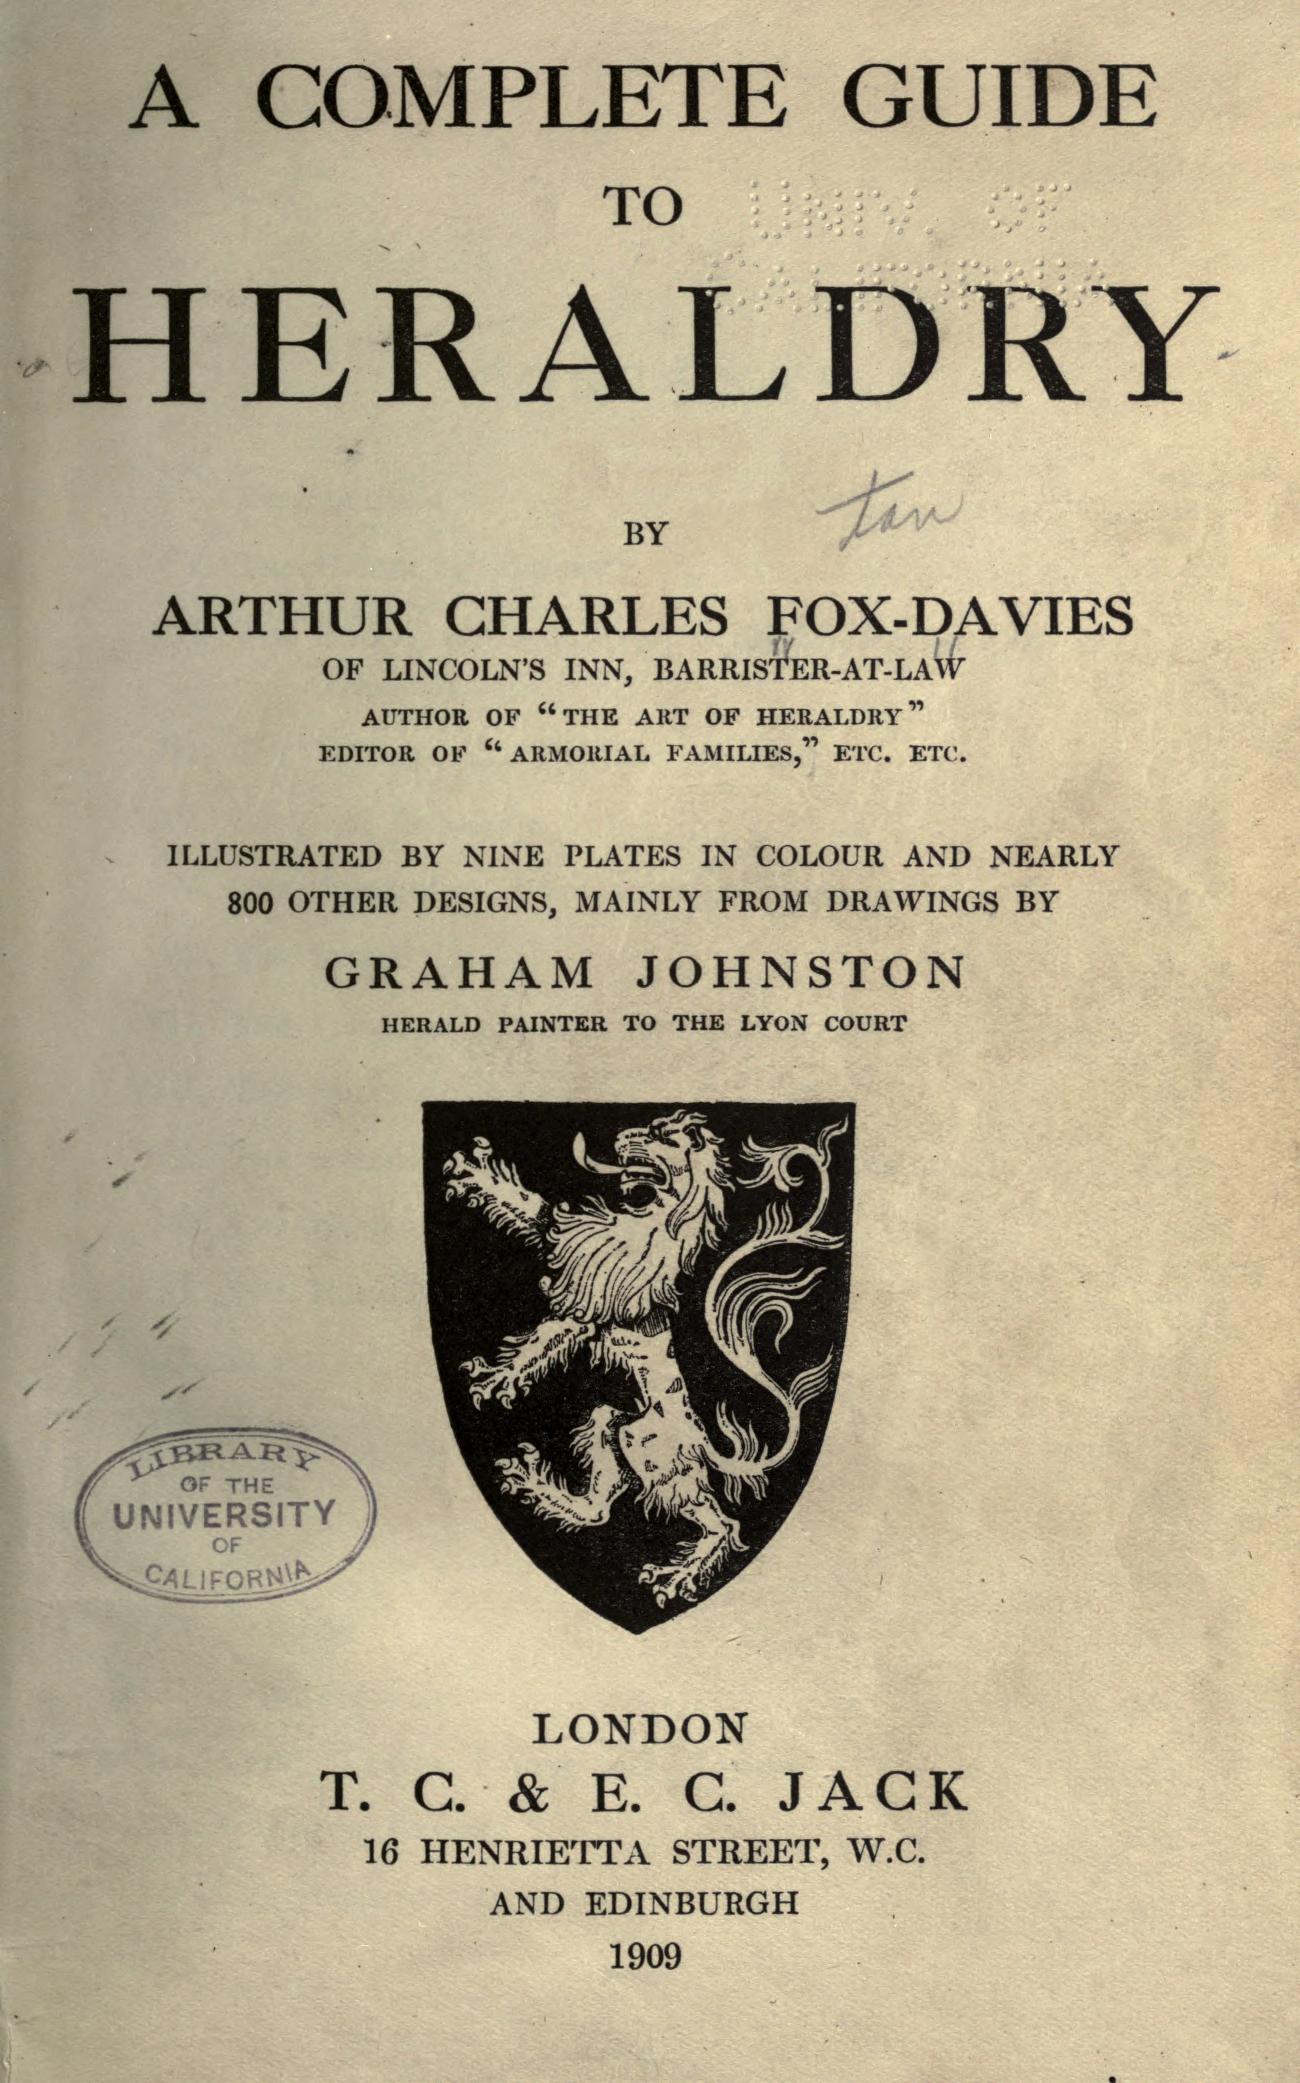 Image of A Complete Guide To Heraldry 1909 Cover Page